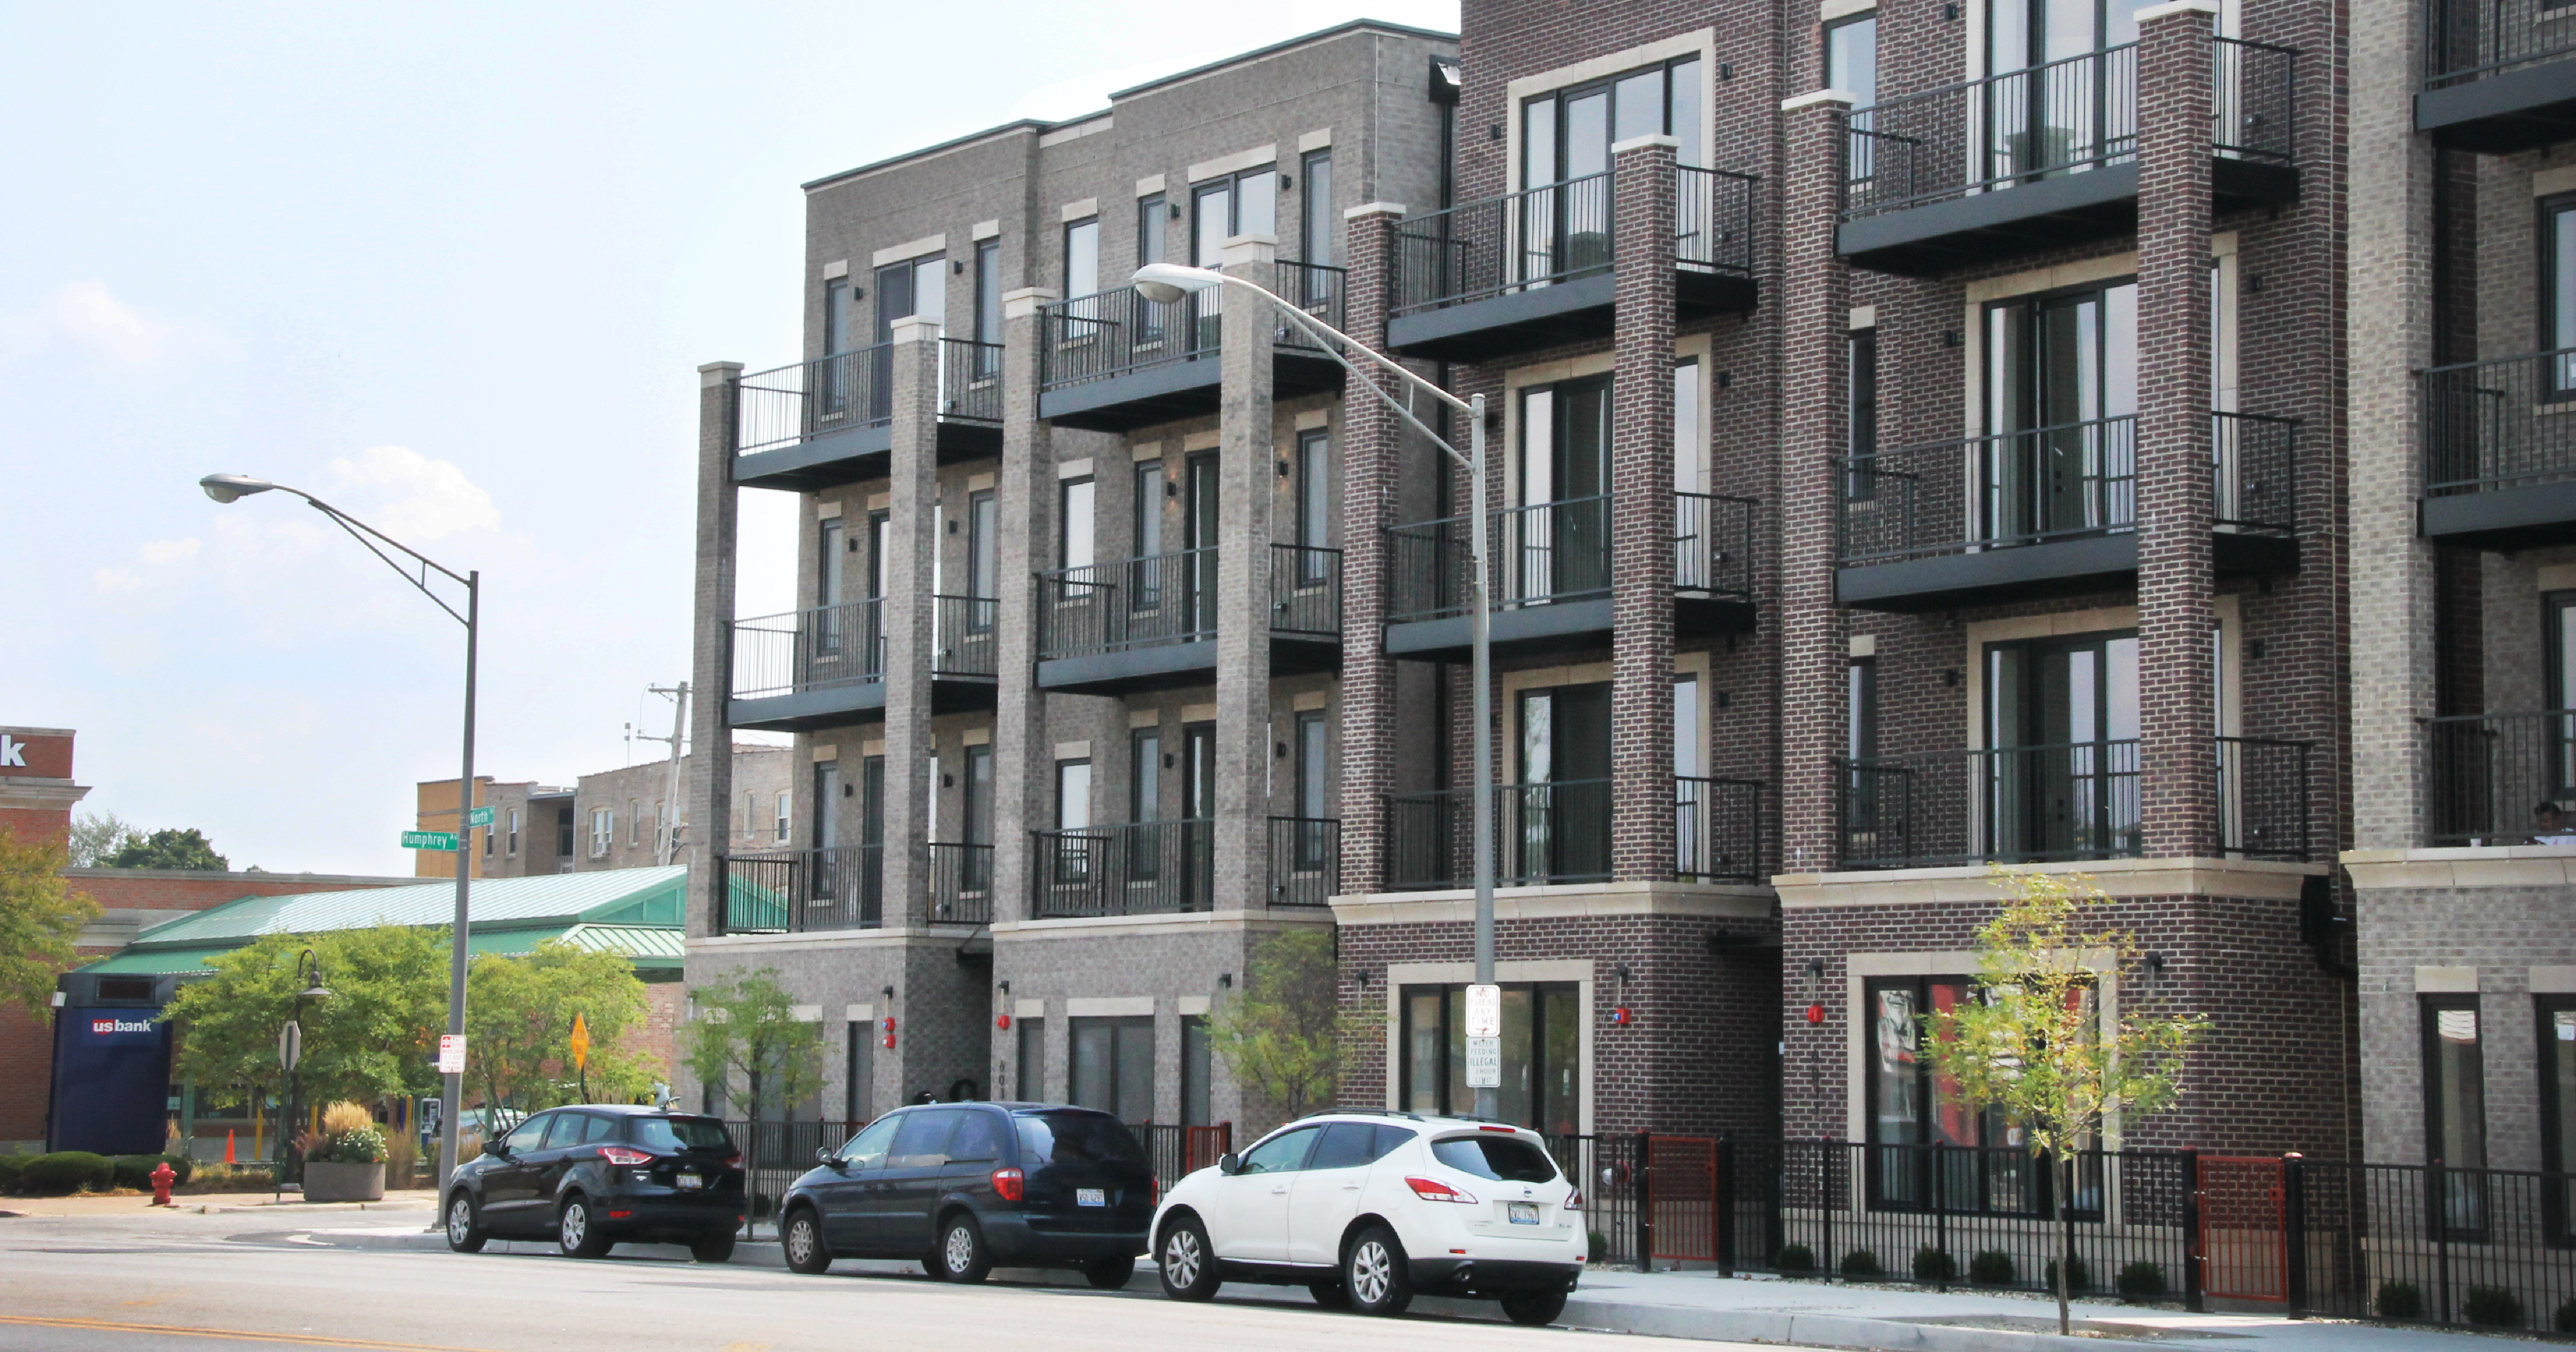 North Avenue revitalization kicks off with housing boom - CMAP